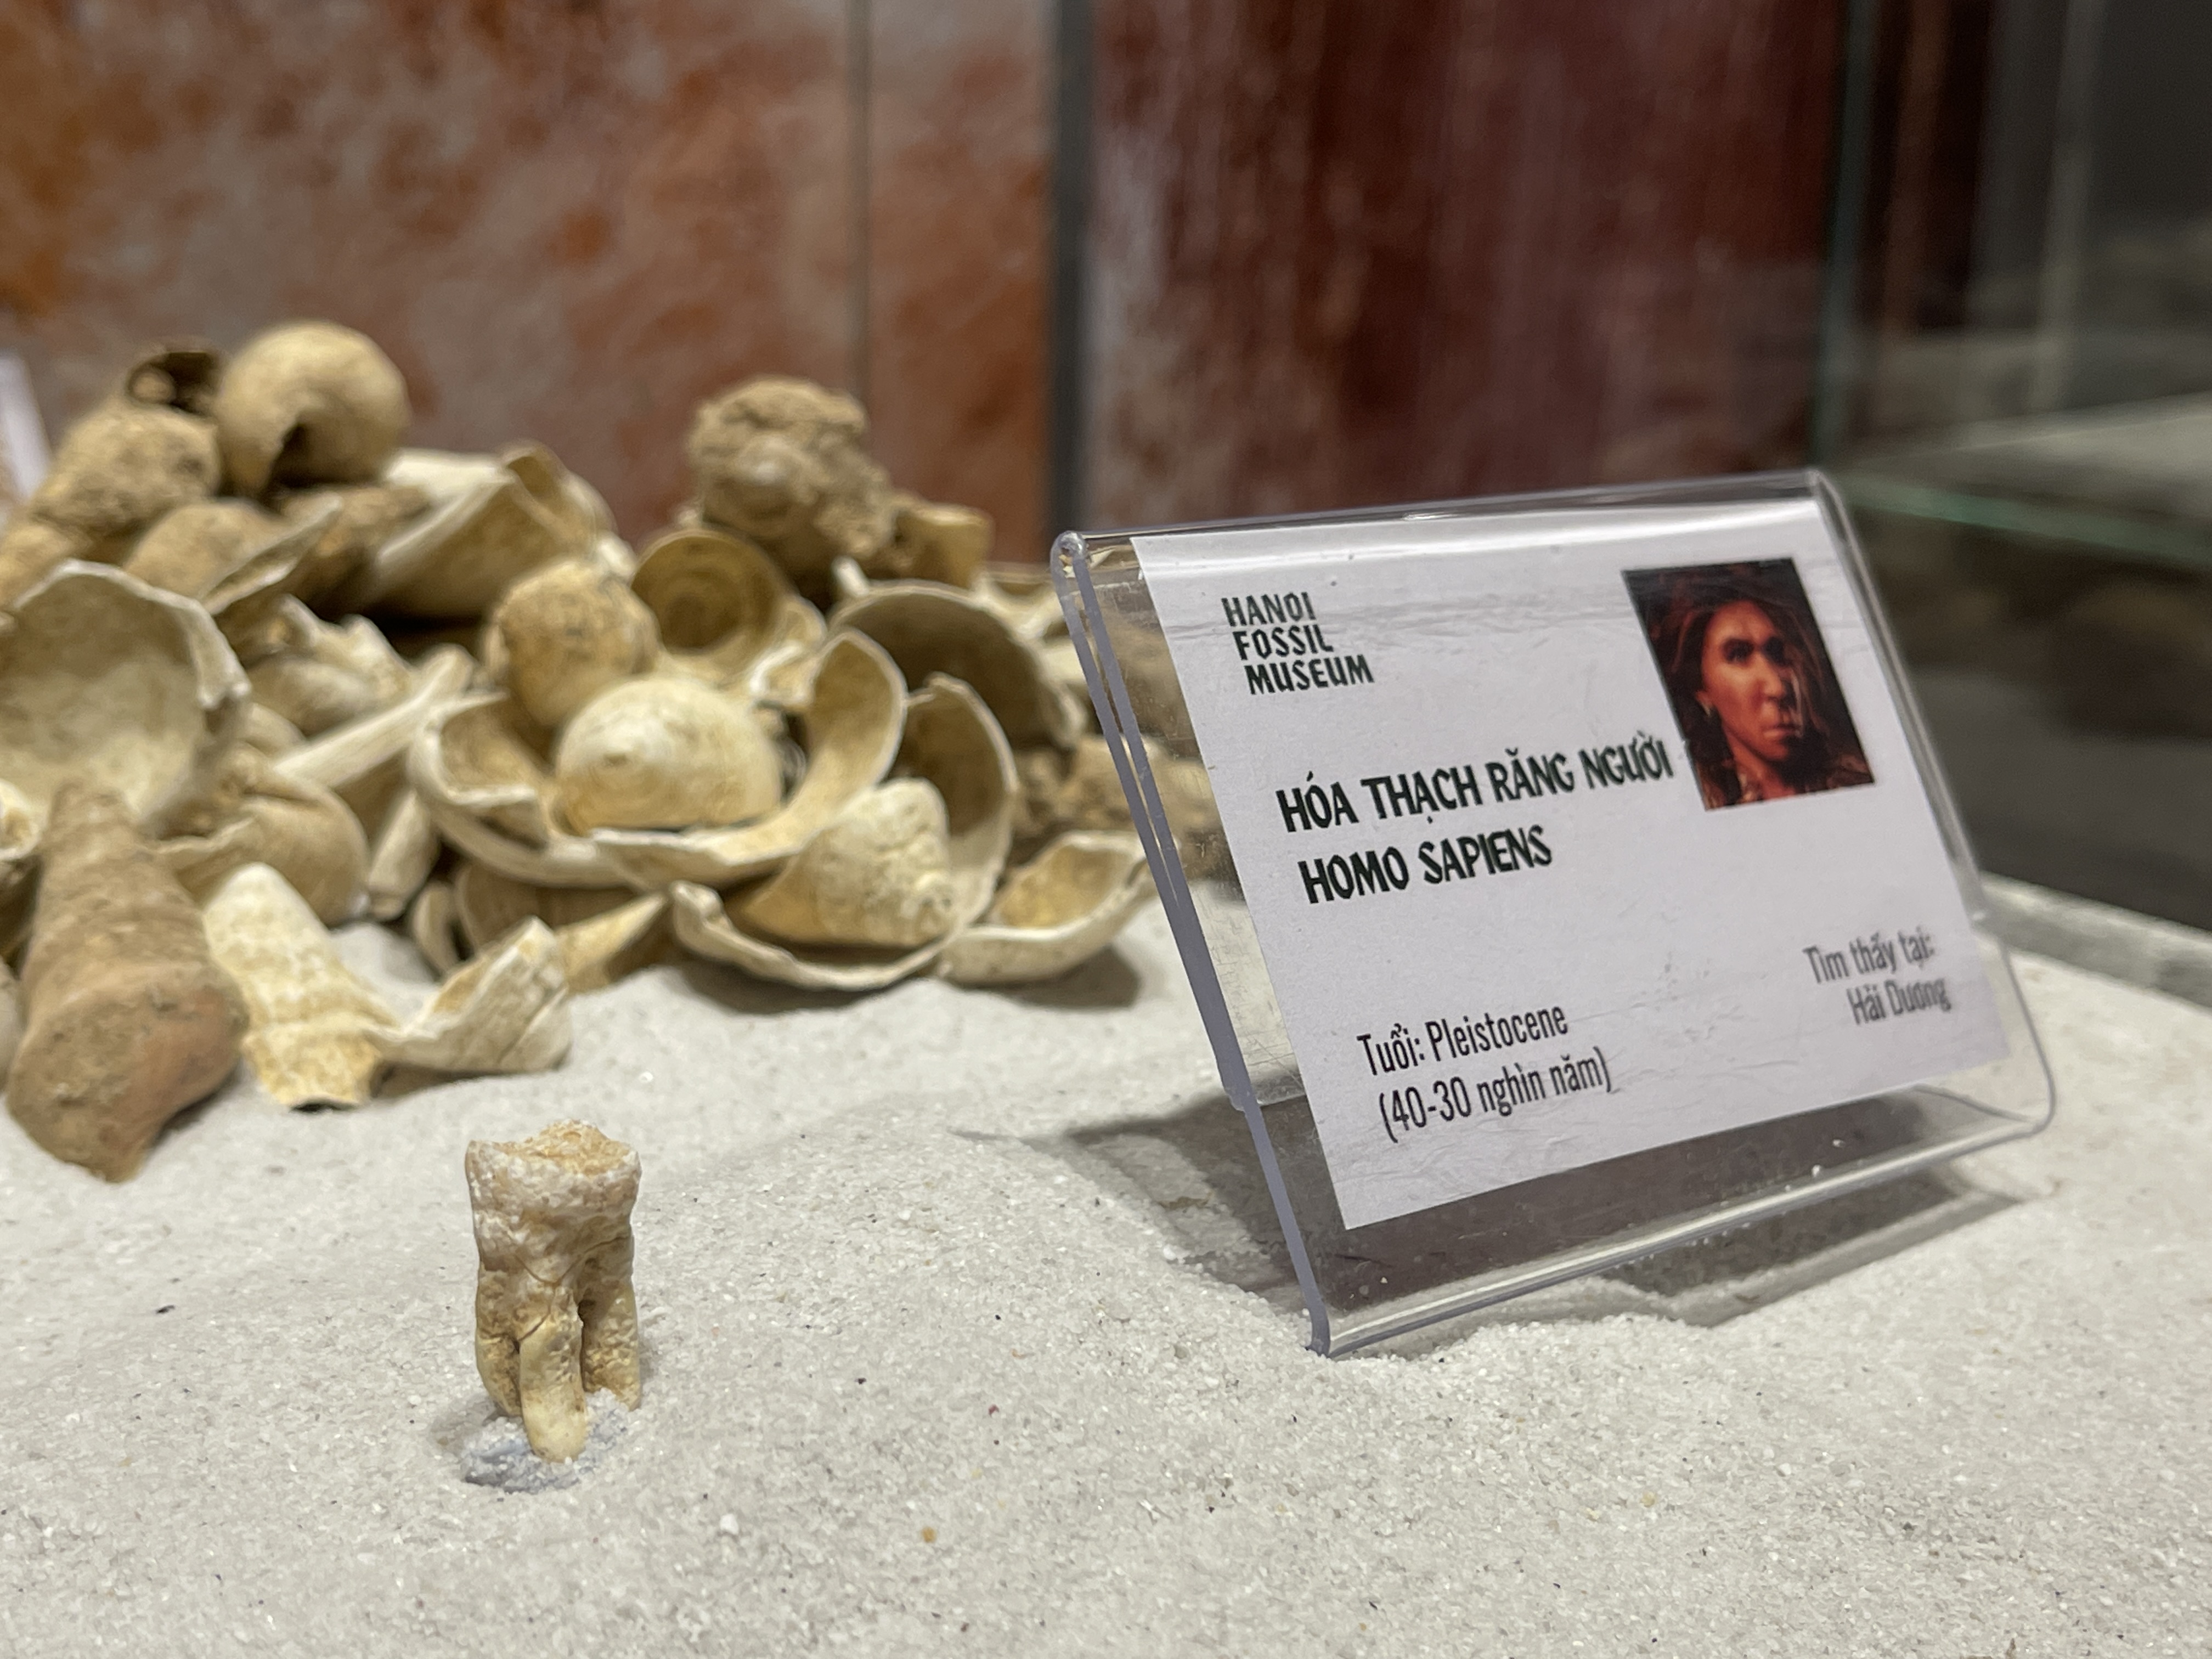 A human tooth fossil from the Pleistocene era on display at the exhibition. Photo: Dong Nguyen / Tuoi Tre News